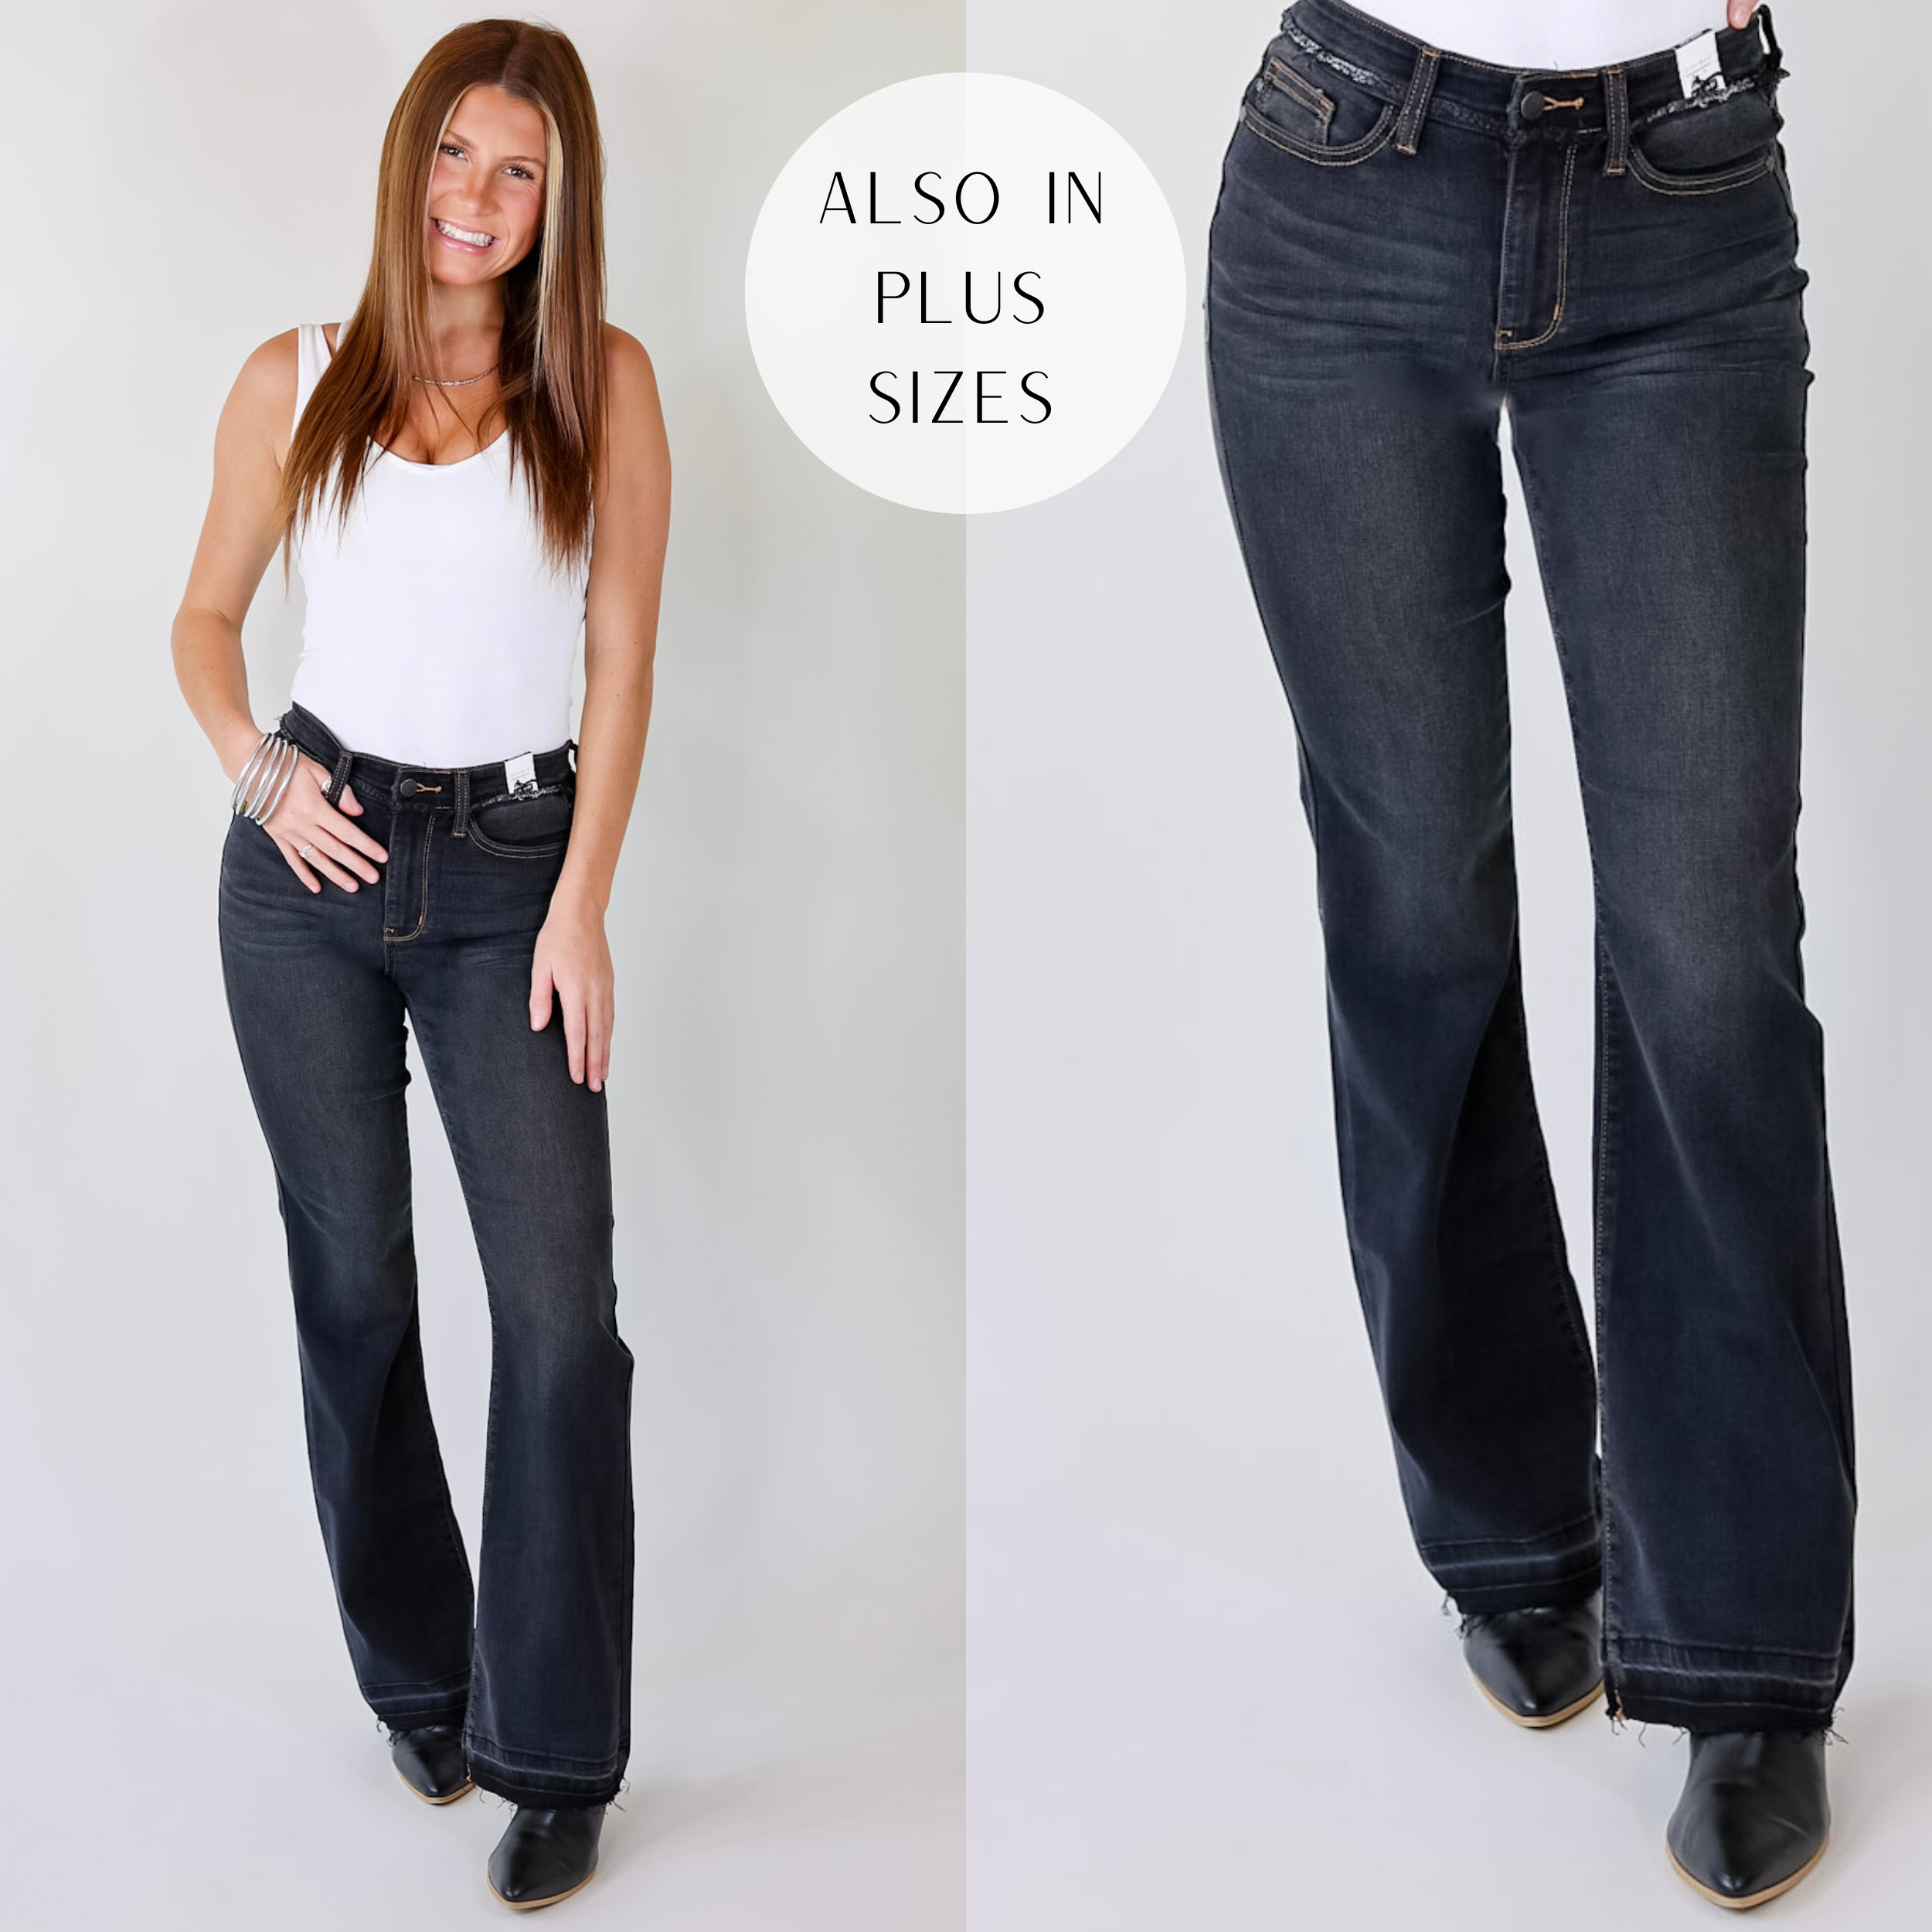 Judy Blue | Greatest Opportunity Release Hem Jeans with Frayed Waist in Black Wash - Giddy Up Glamour Boutique